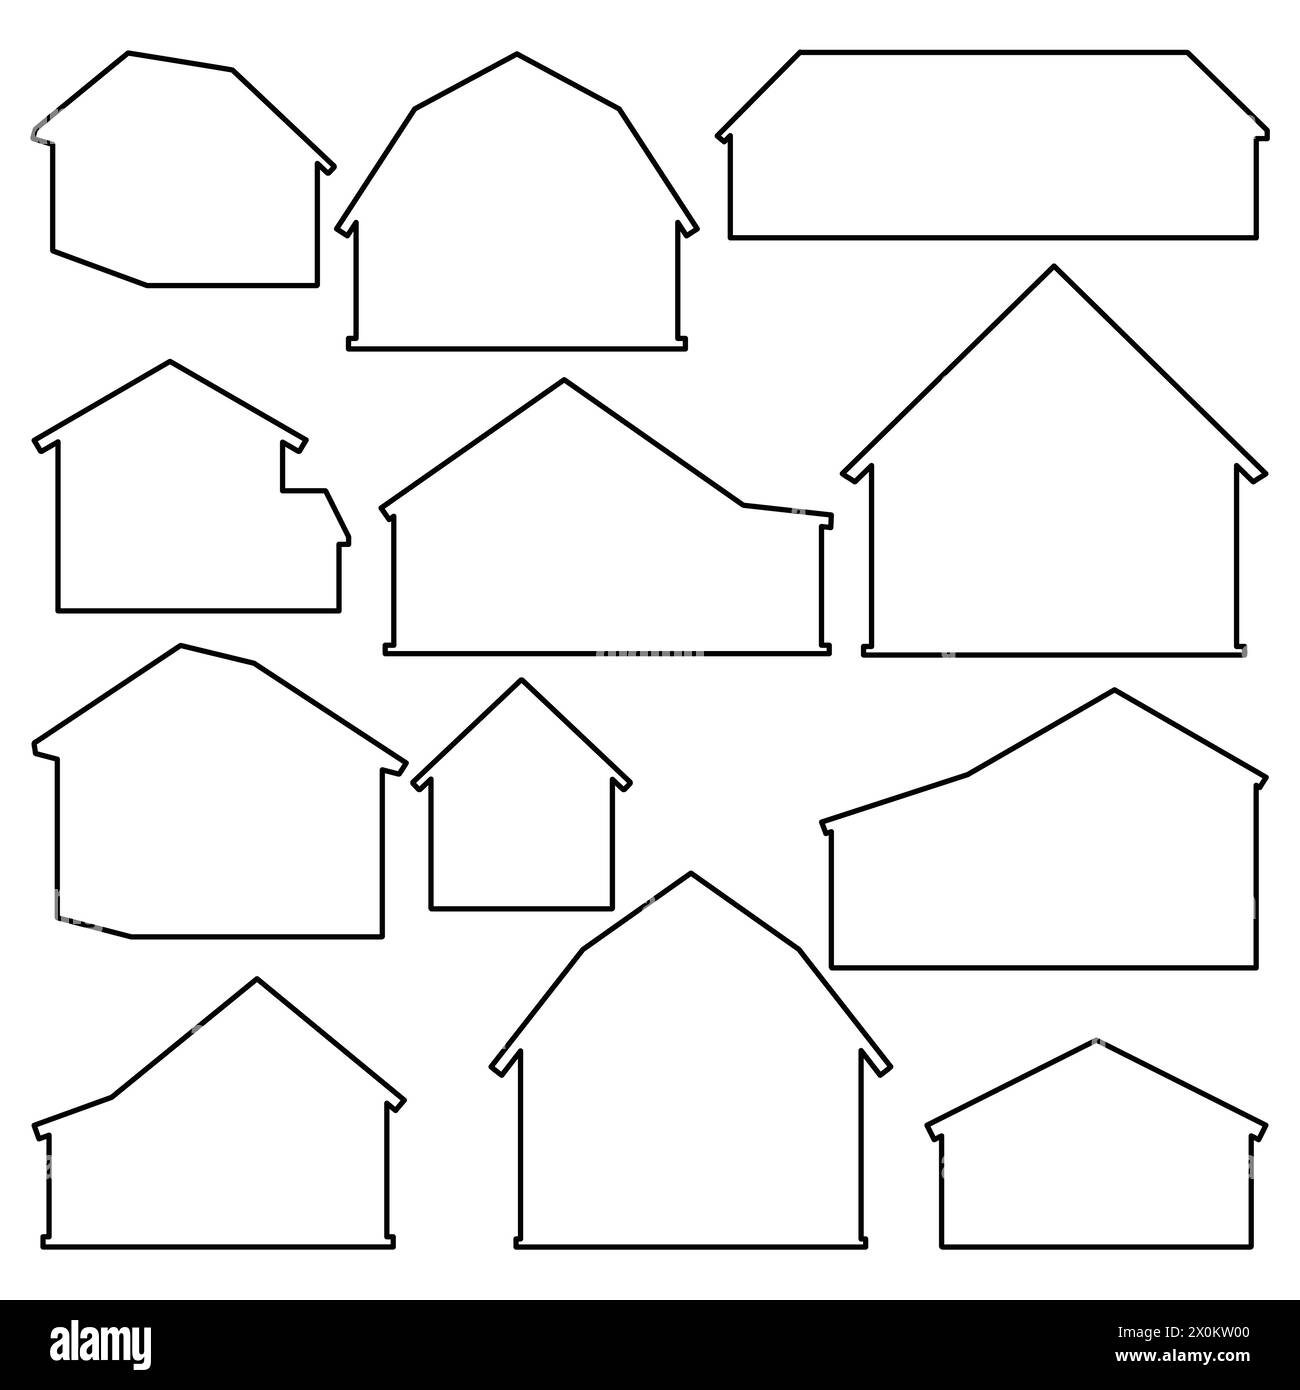 Big black barn silhouette line set. Different farm houses or barns. Vector collection of illustration of wooden outline buildings Stock Vector